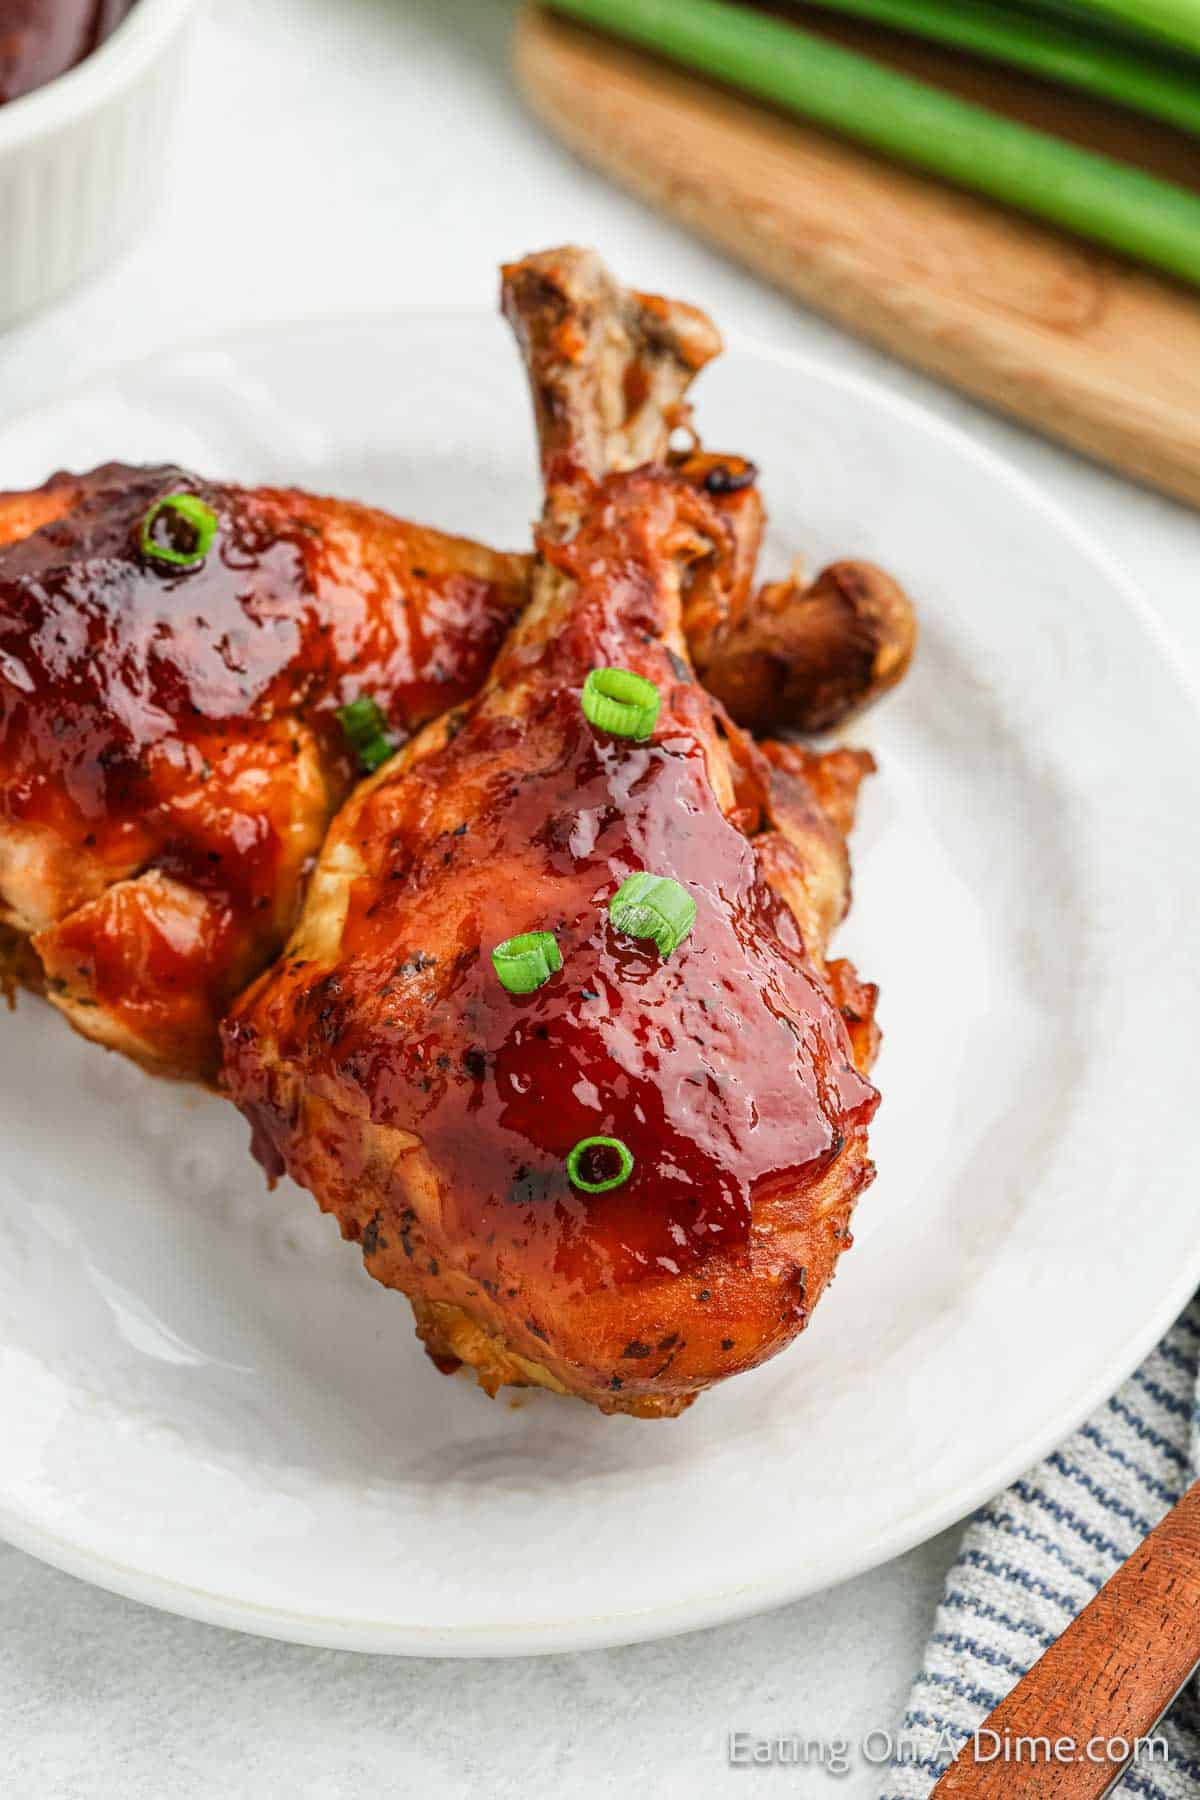 A close-up of a plate with two glazed chicken legs garnished with sliced green onions. The chicken legs appear juicy with a shiny, caramelized sauce, reminiscent of a crock pot BBQ ranch drumsticks recipe. A striped cloth napkin is partially visible in the corner.